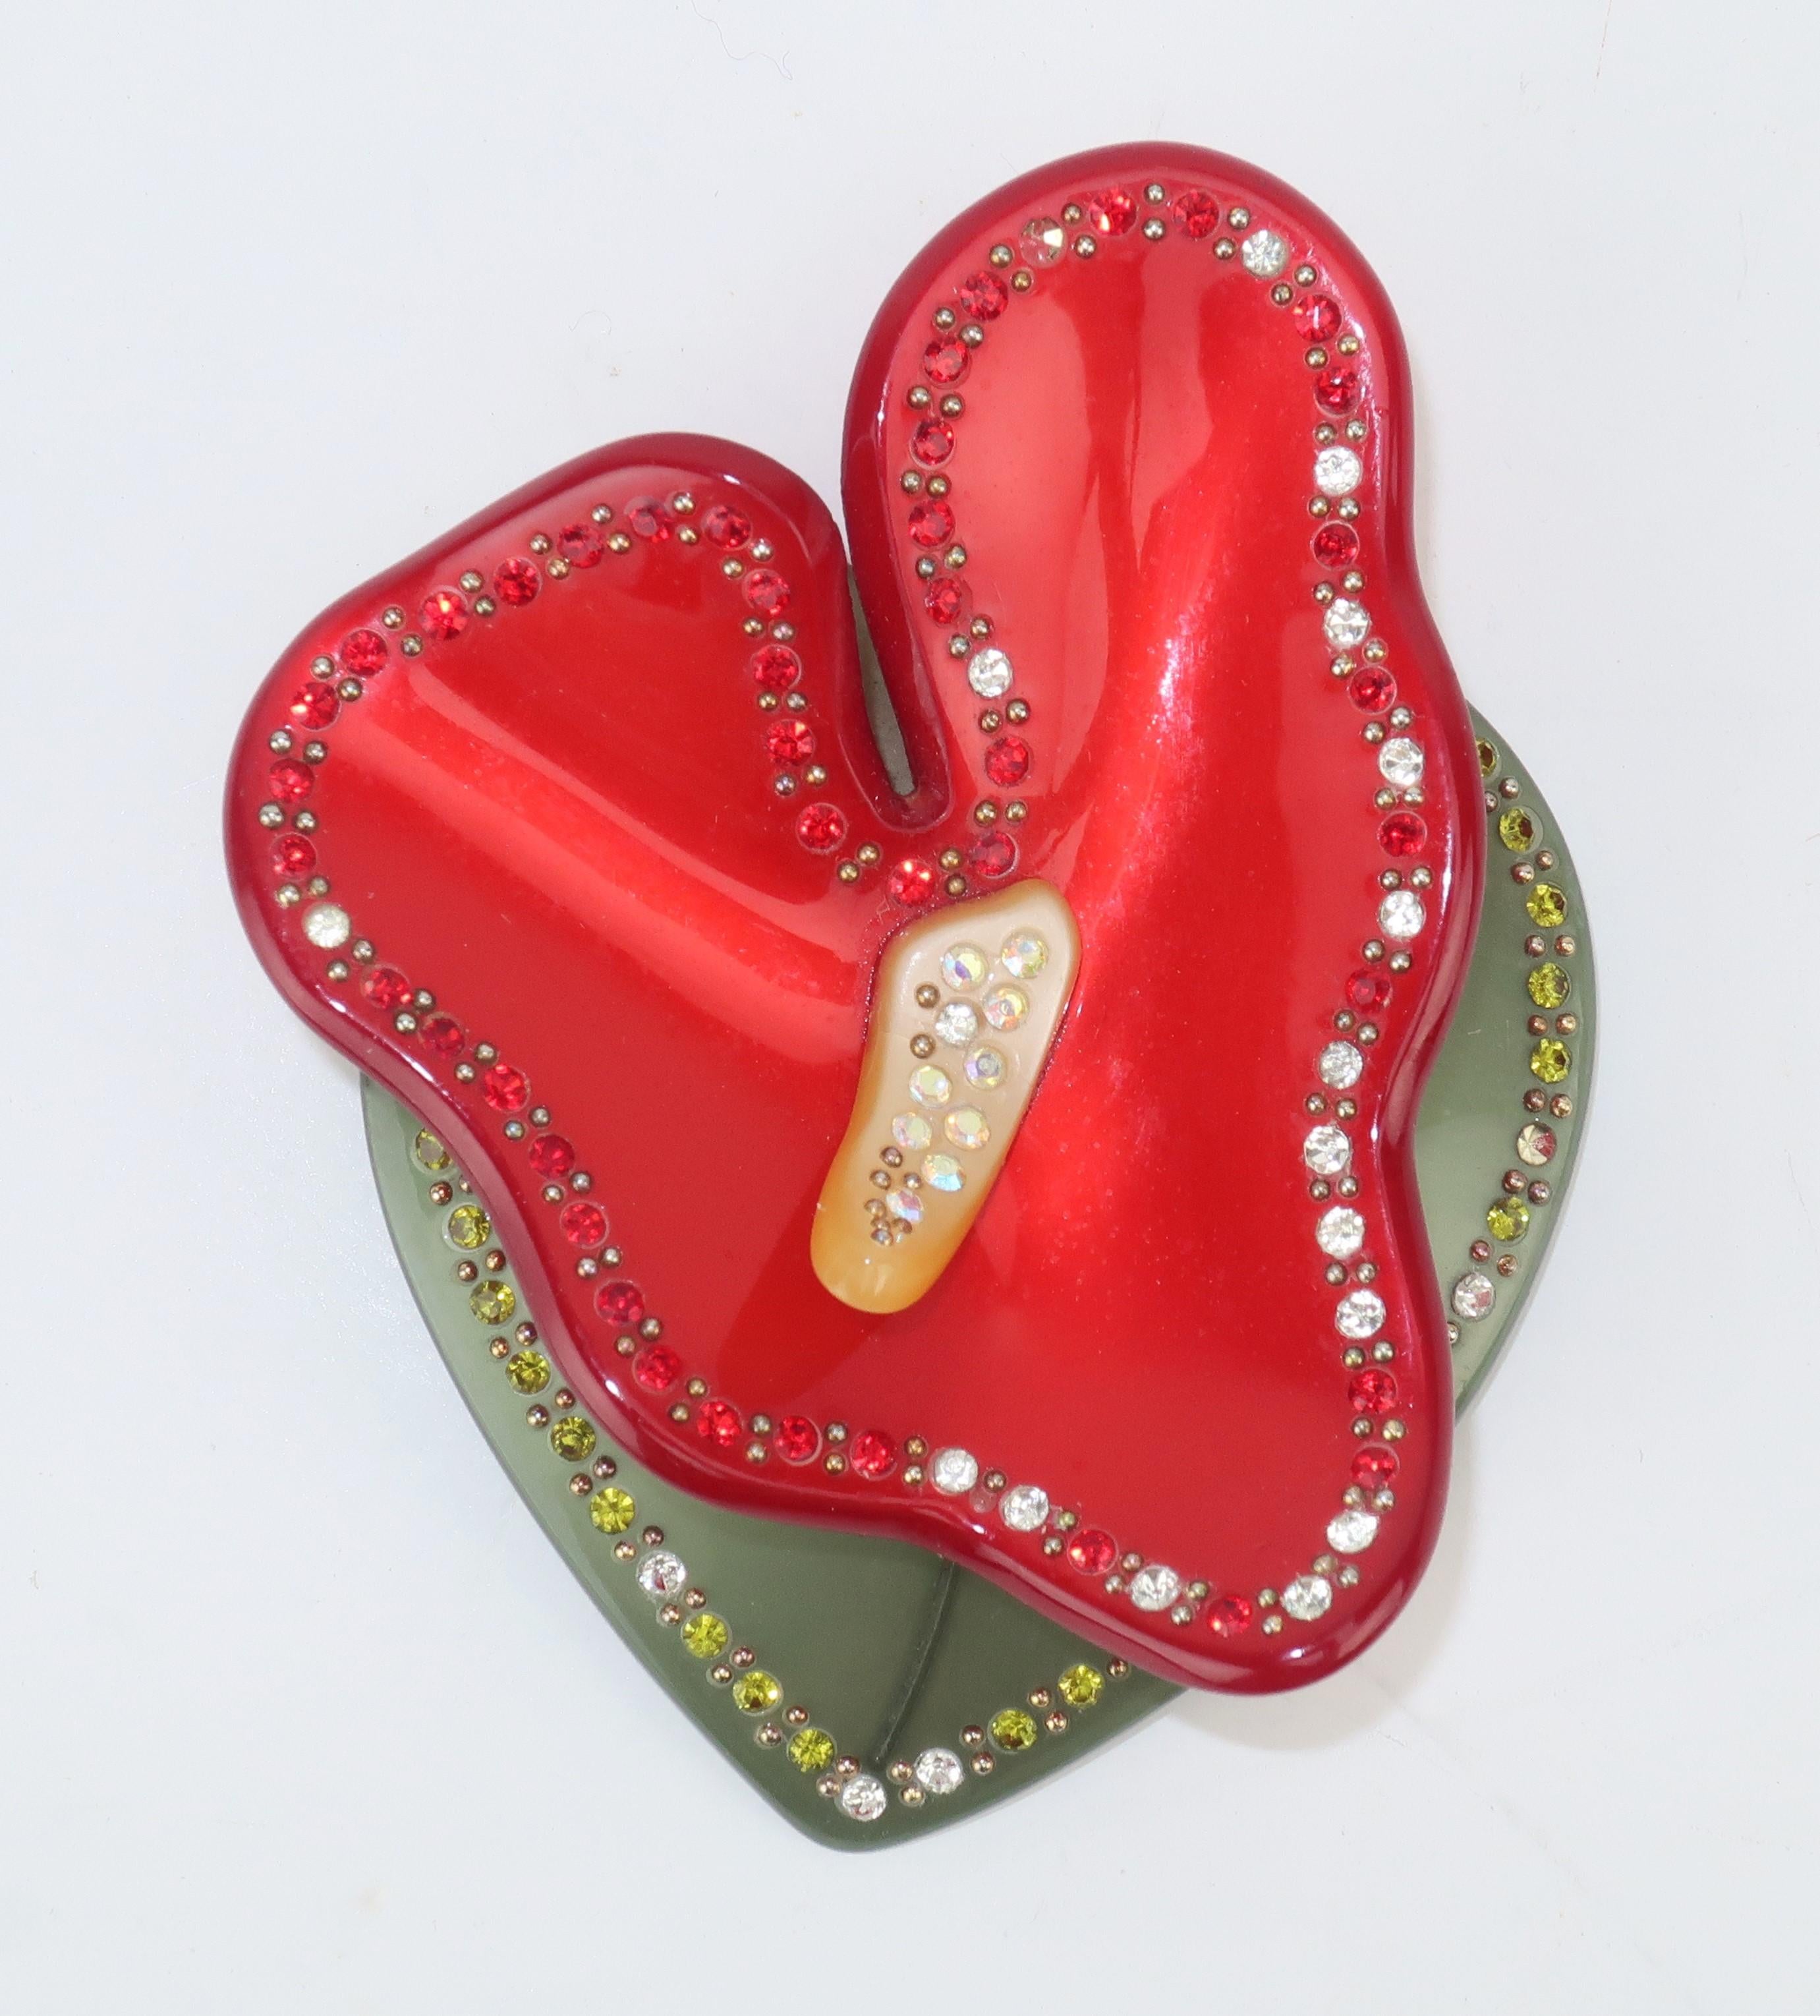 Retro red, butter yellow and moss green plastic tropical flower brooch embellished with red, green and crystal rhinestones mixed with tiny studs for just the right amount of bling.  Outfitted with straight pin and safety catch.  Perfect for a Spring